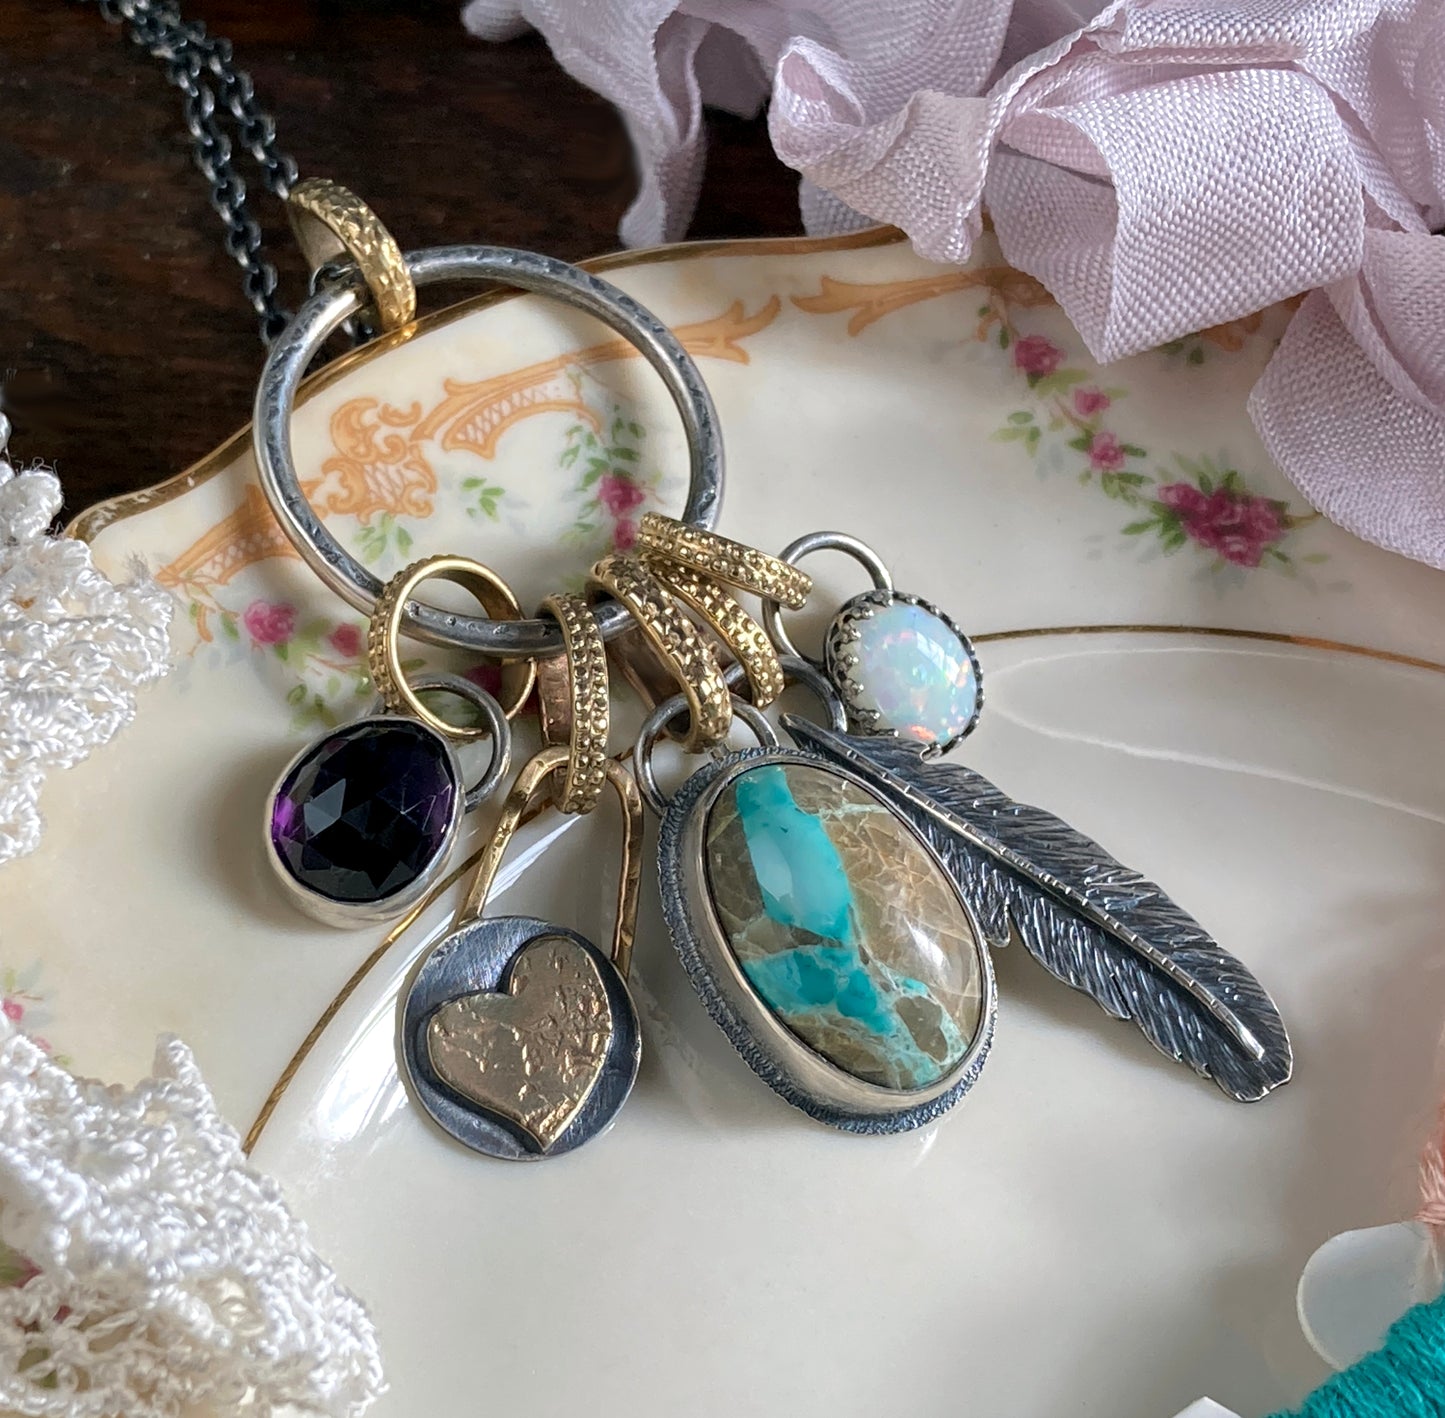 Luxurious Gemstone Charm Necklace with American Turquoise, Ethiopian Opal, Amethyst | Silver & Gold Mixed Metal Jewelry